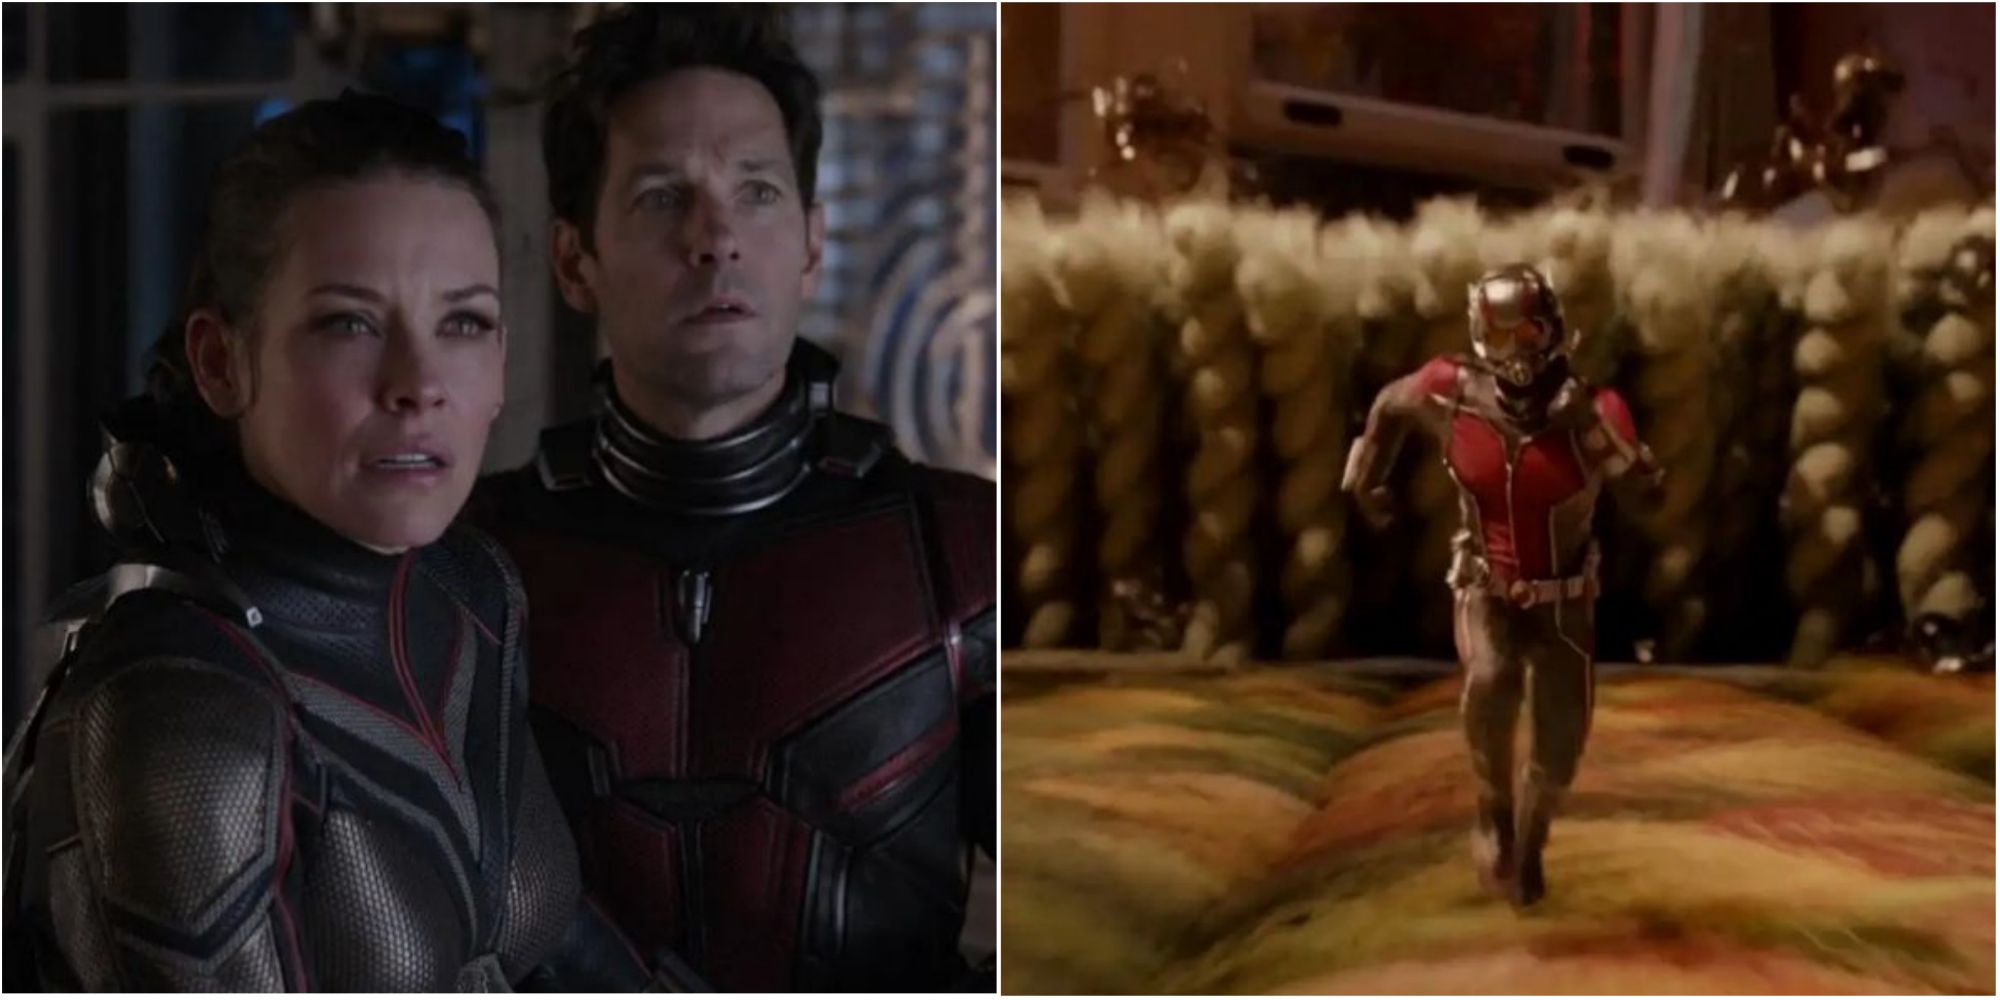 Ant-Man and the Wasp close up shot on the left and Ant-Man running on the right